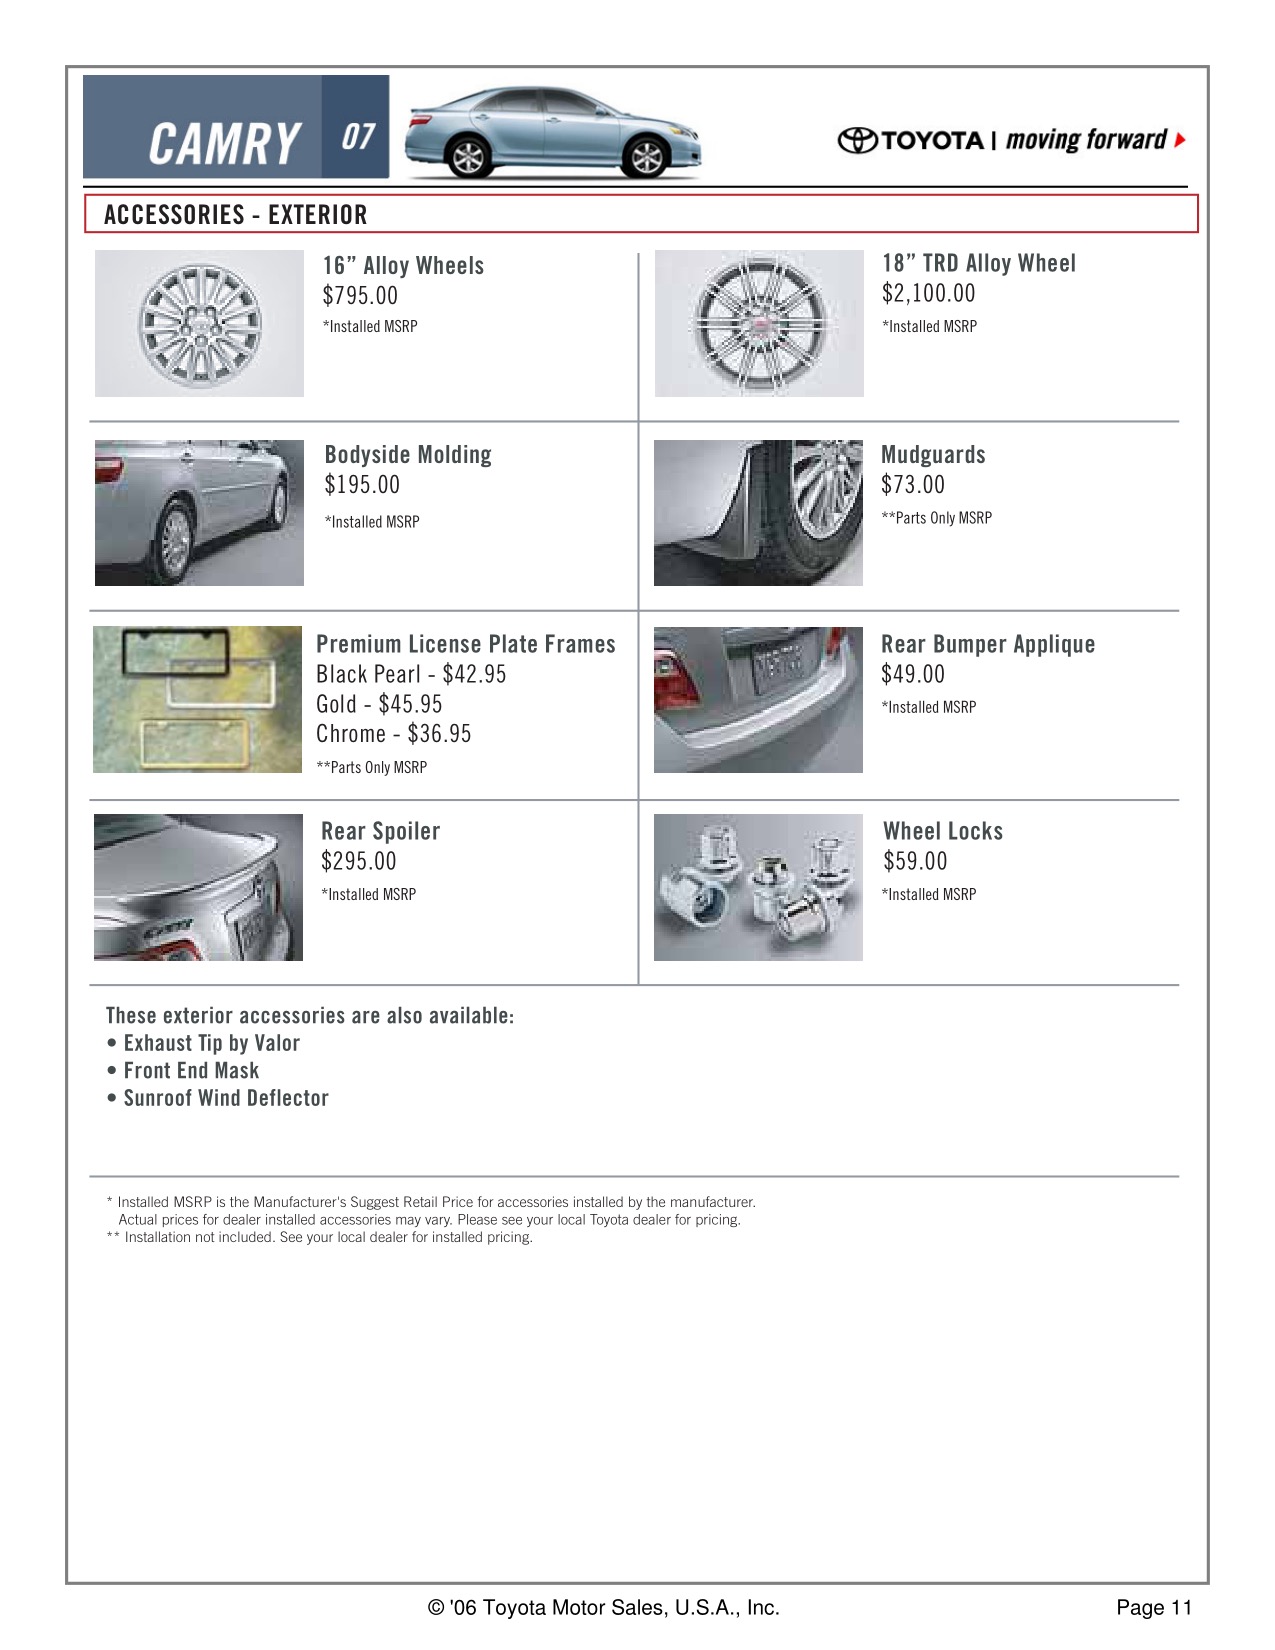 2007 Toyota Camry Brochure Page 9